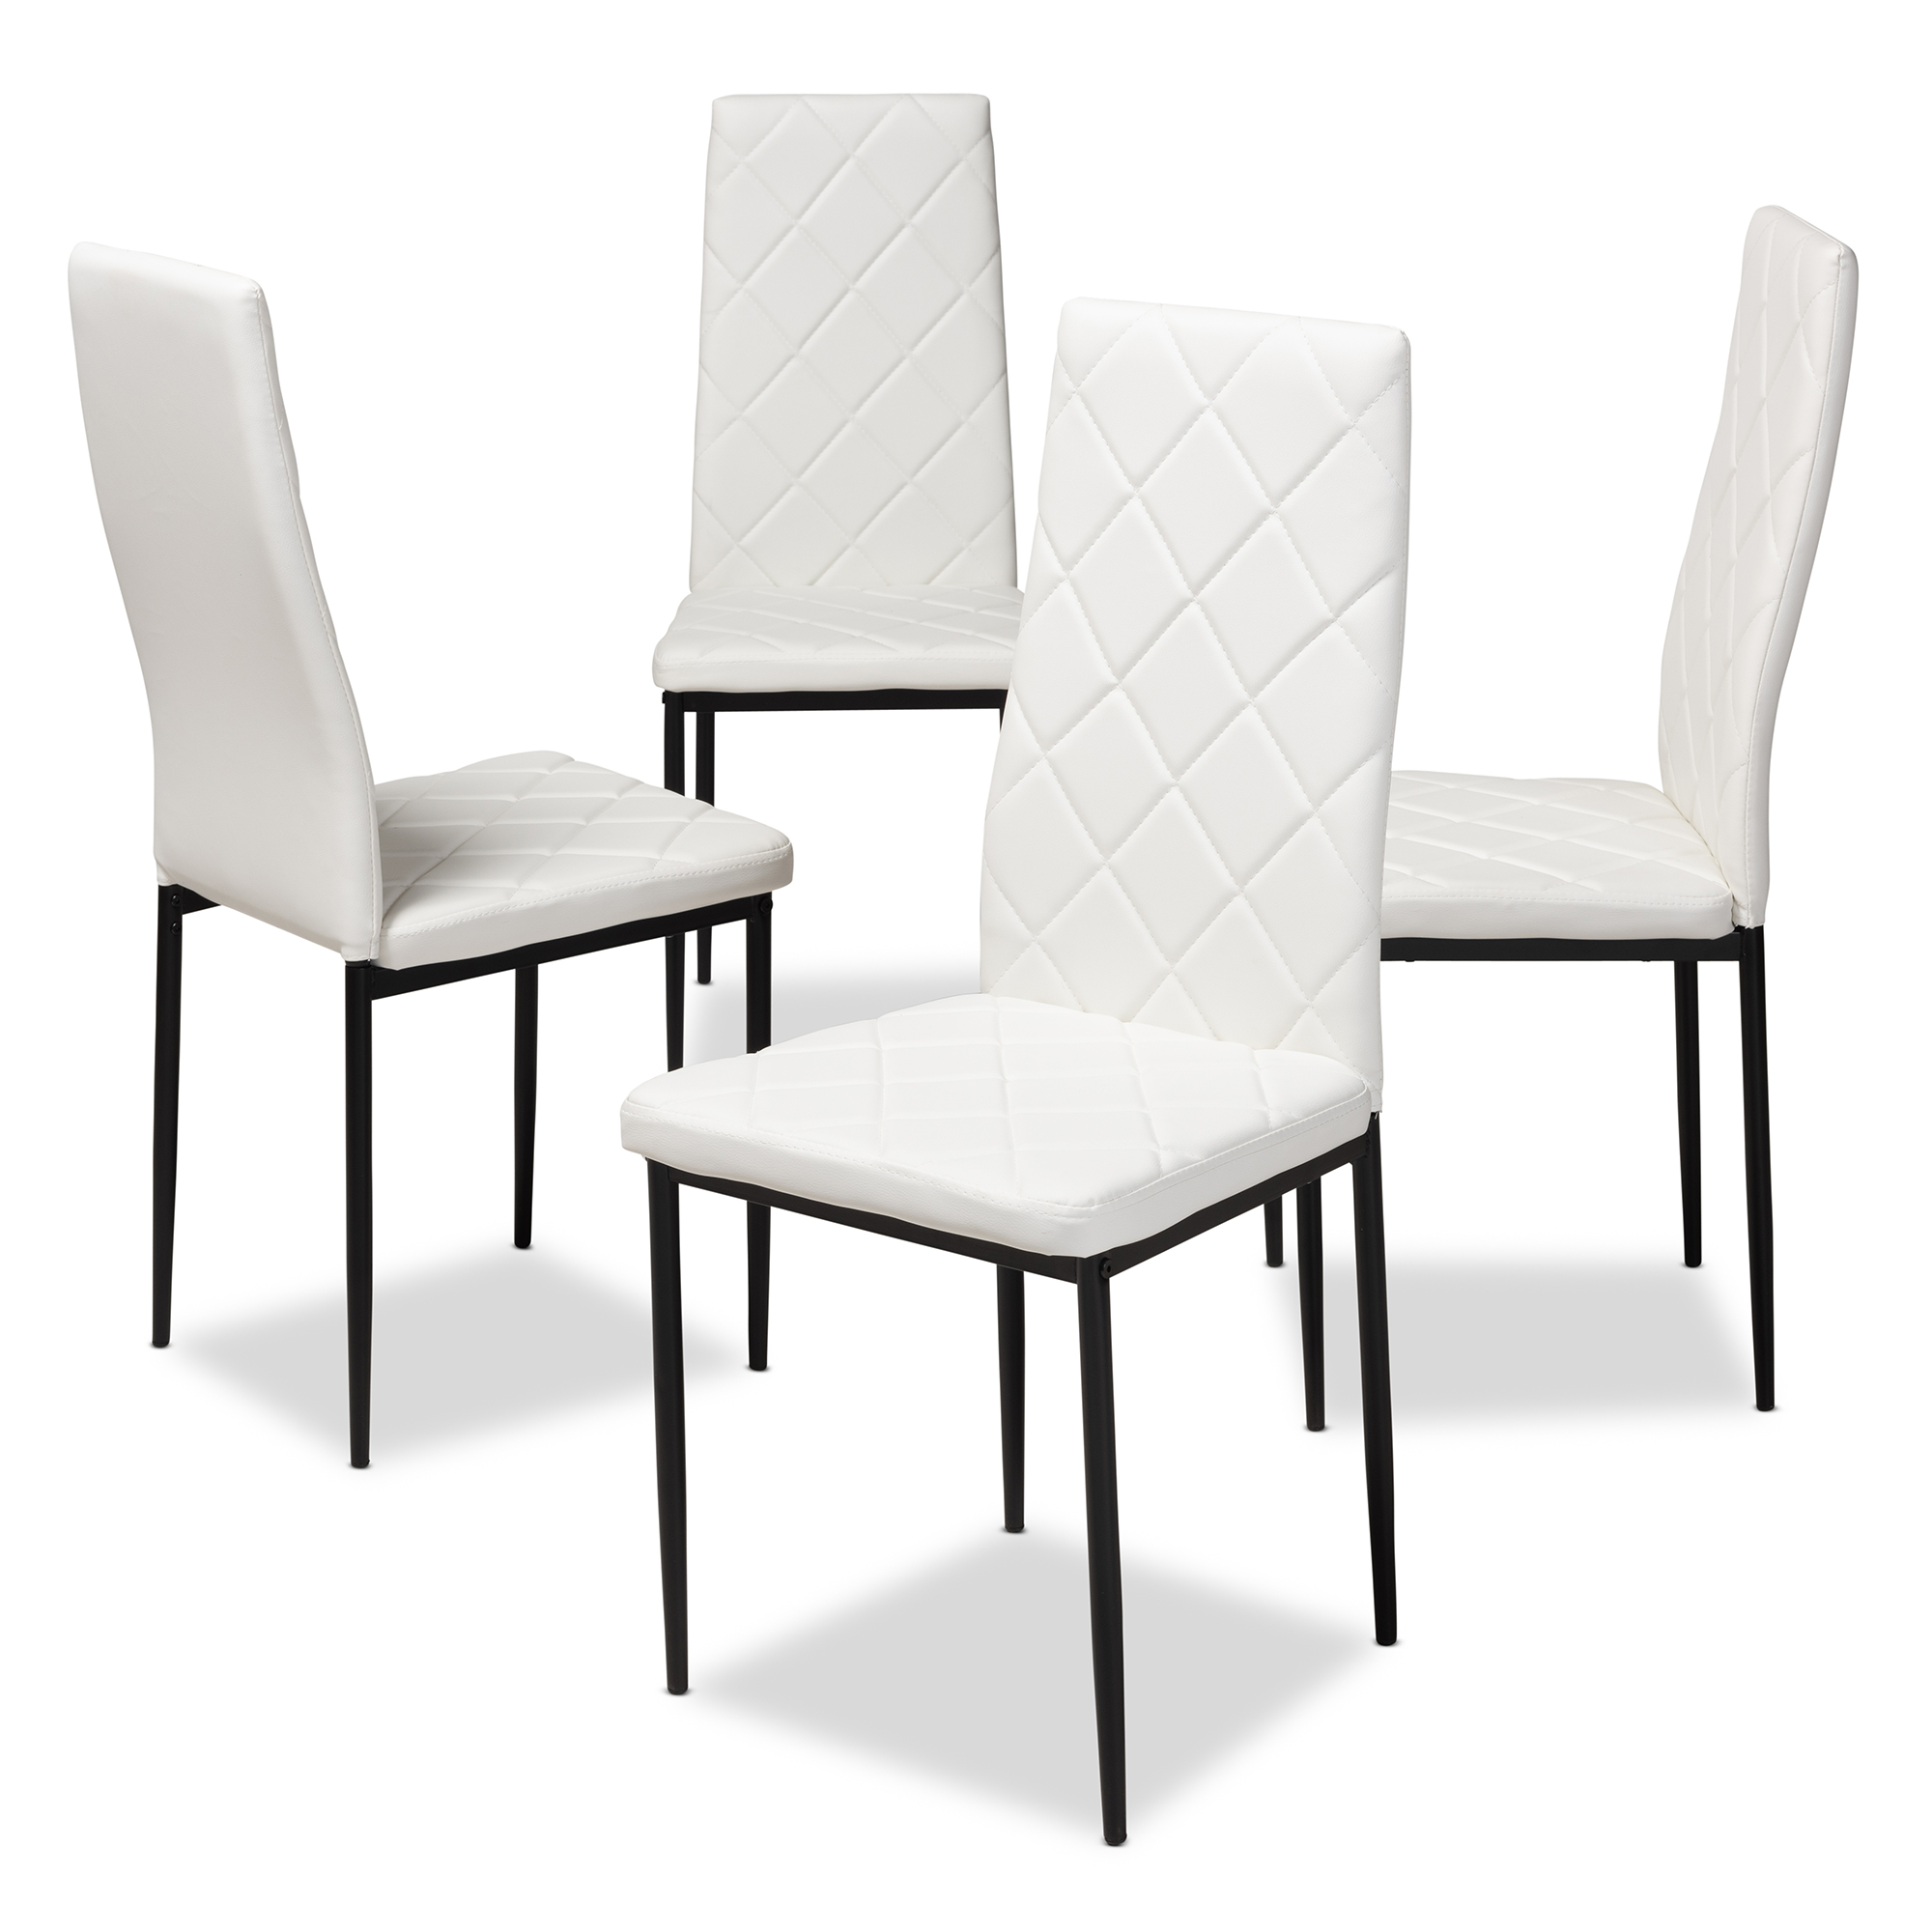 Baxton Studio Blaise Modern and Contemporary White Faux Leather Upholstered Dining Chair (Set of 4)